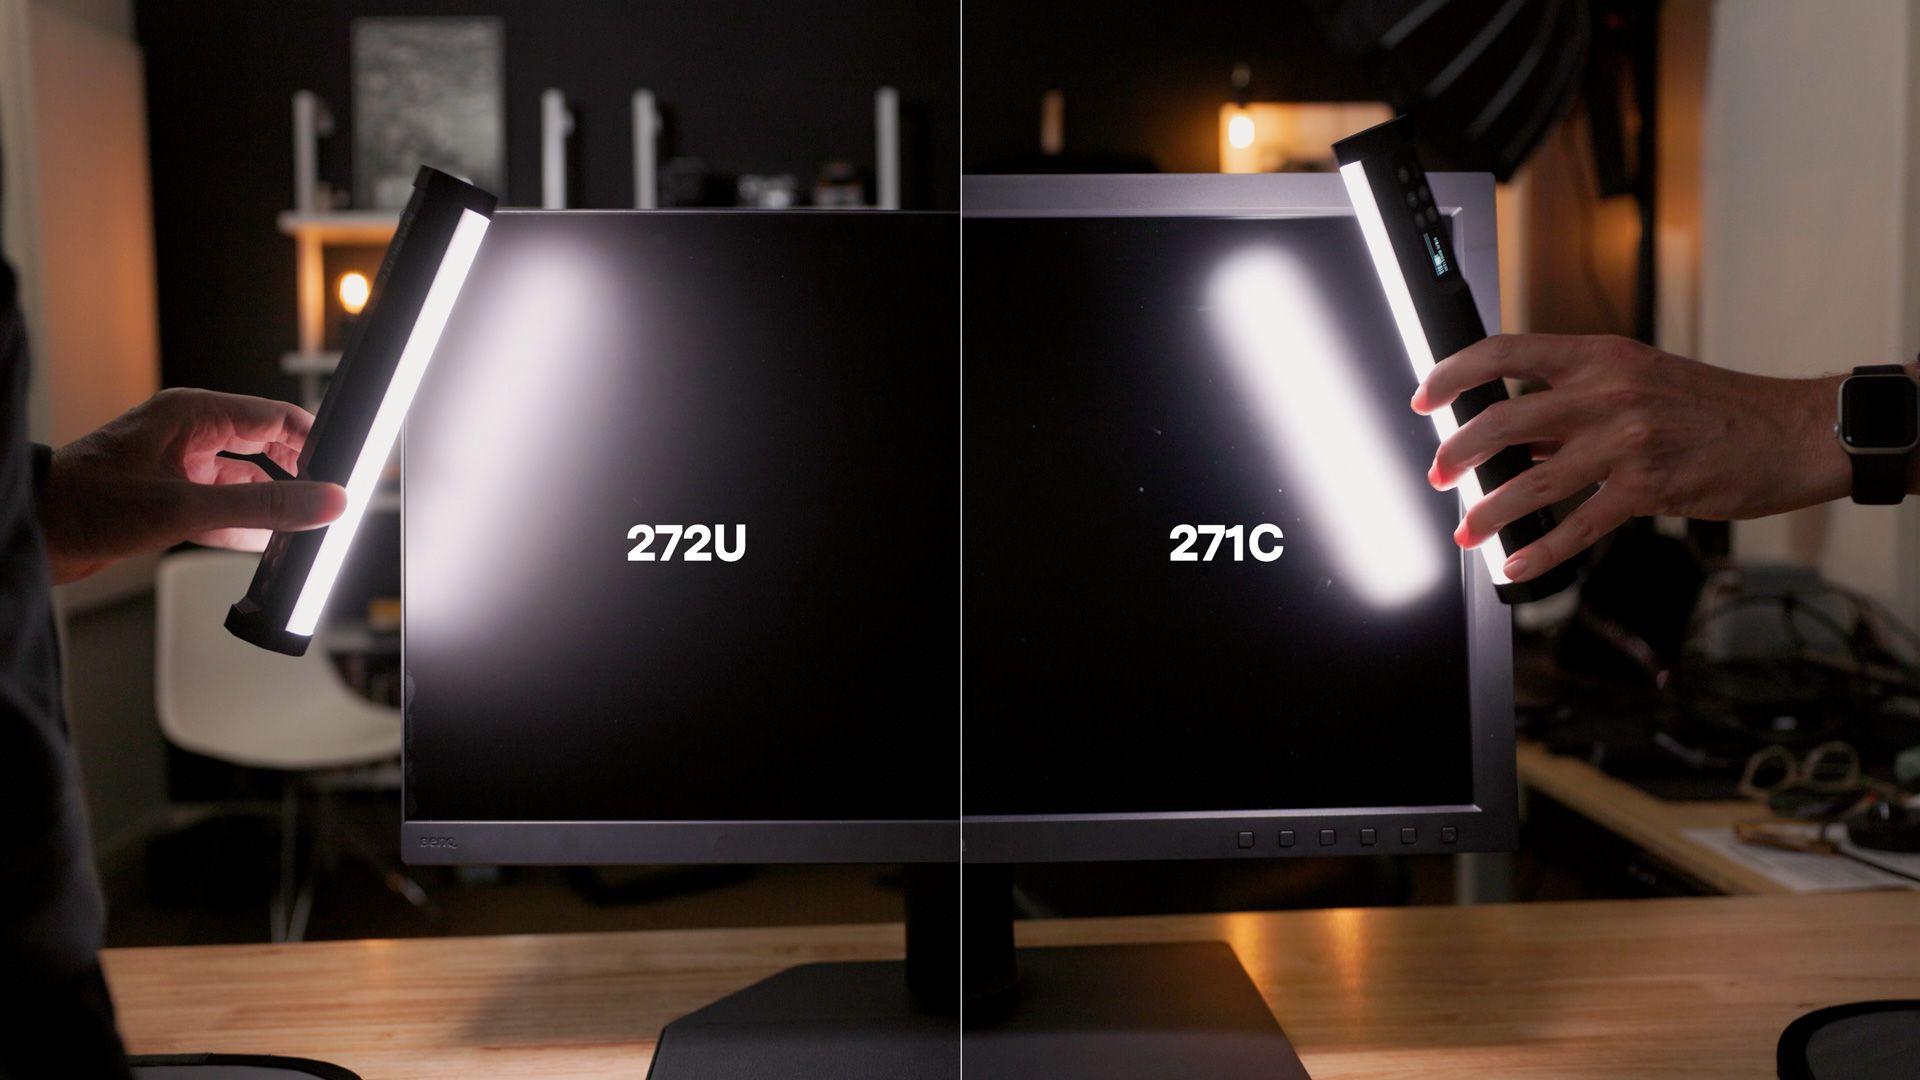 New matte finish in the 272U (left), older matte finish on the 271C (right)